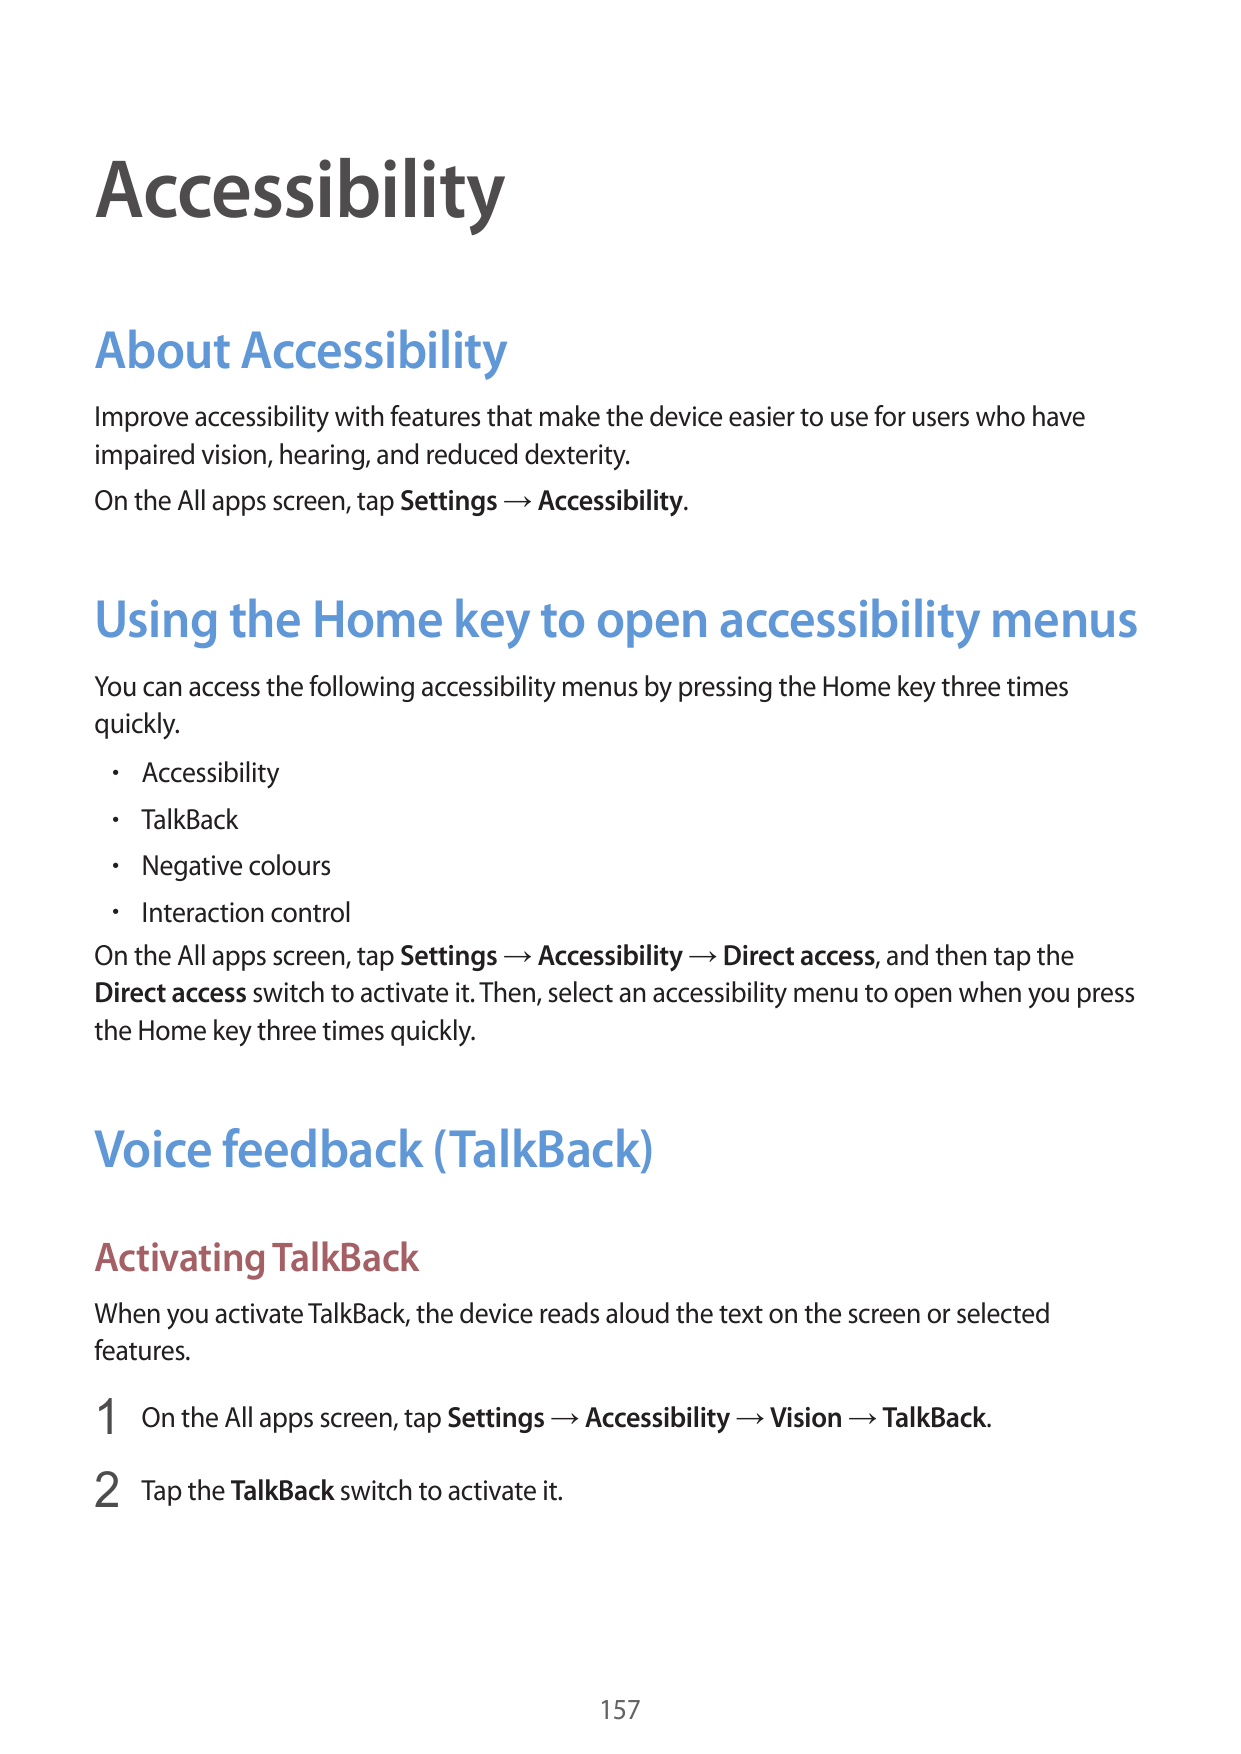 AccessibilityAbout AccessibilityImprove accessibility with features that make the device easier to use for users who haveimpaire